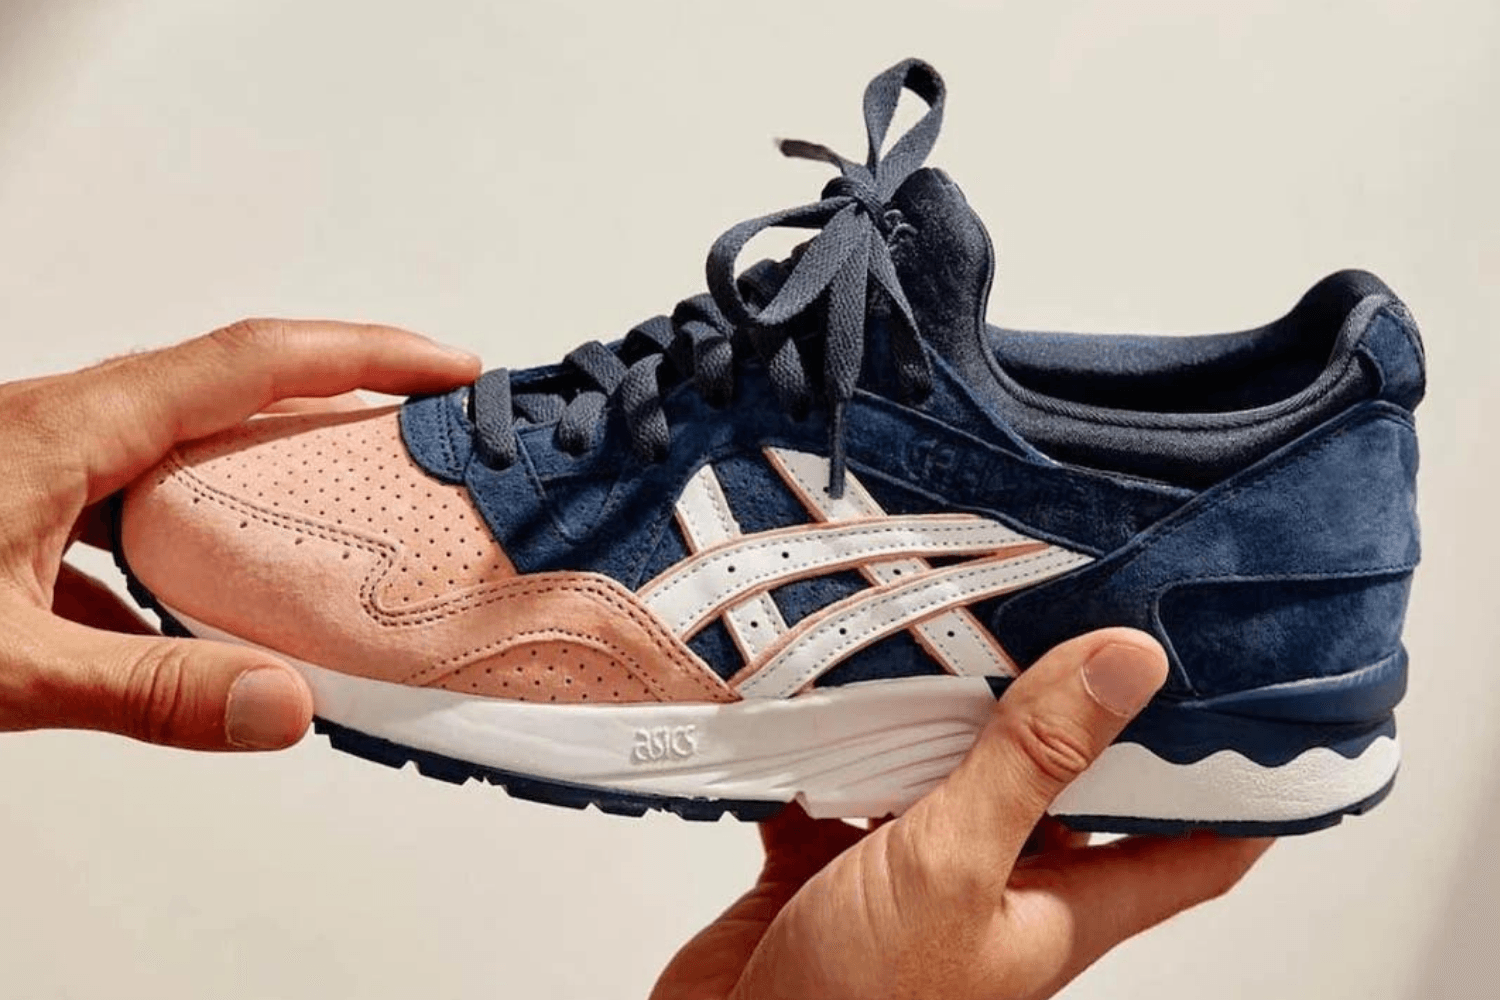 Ronnie Fieg looks back on his collaboration with ASICS